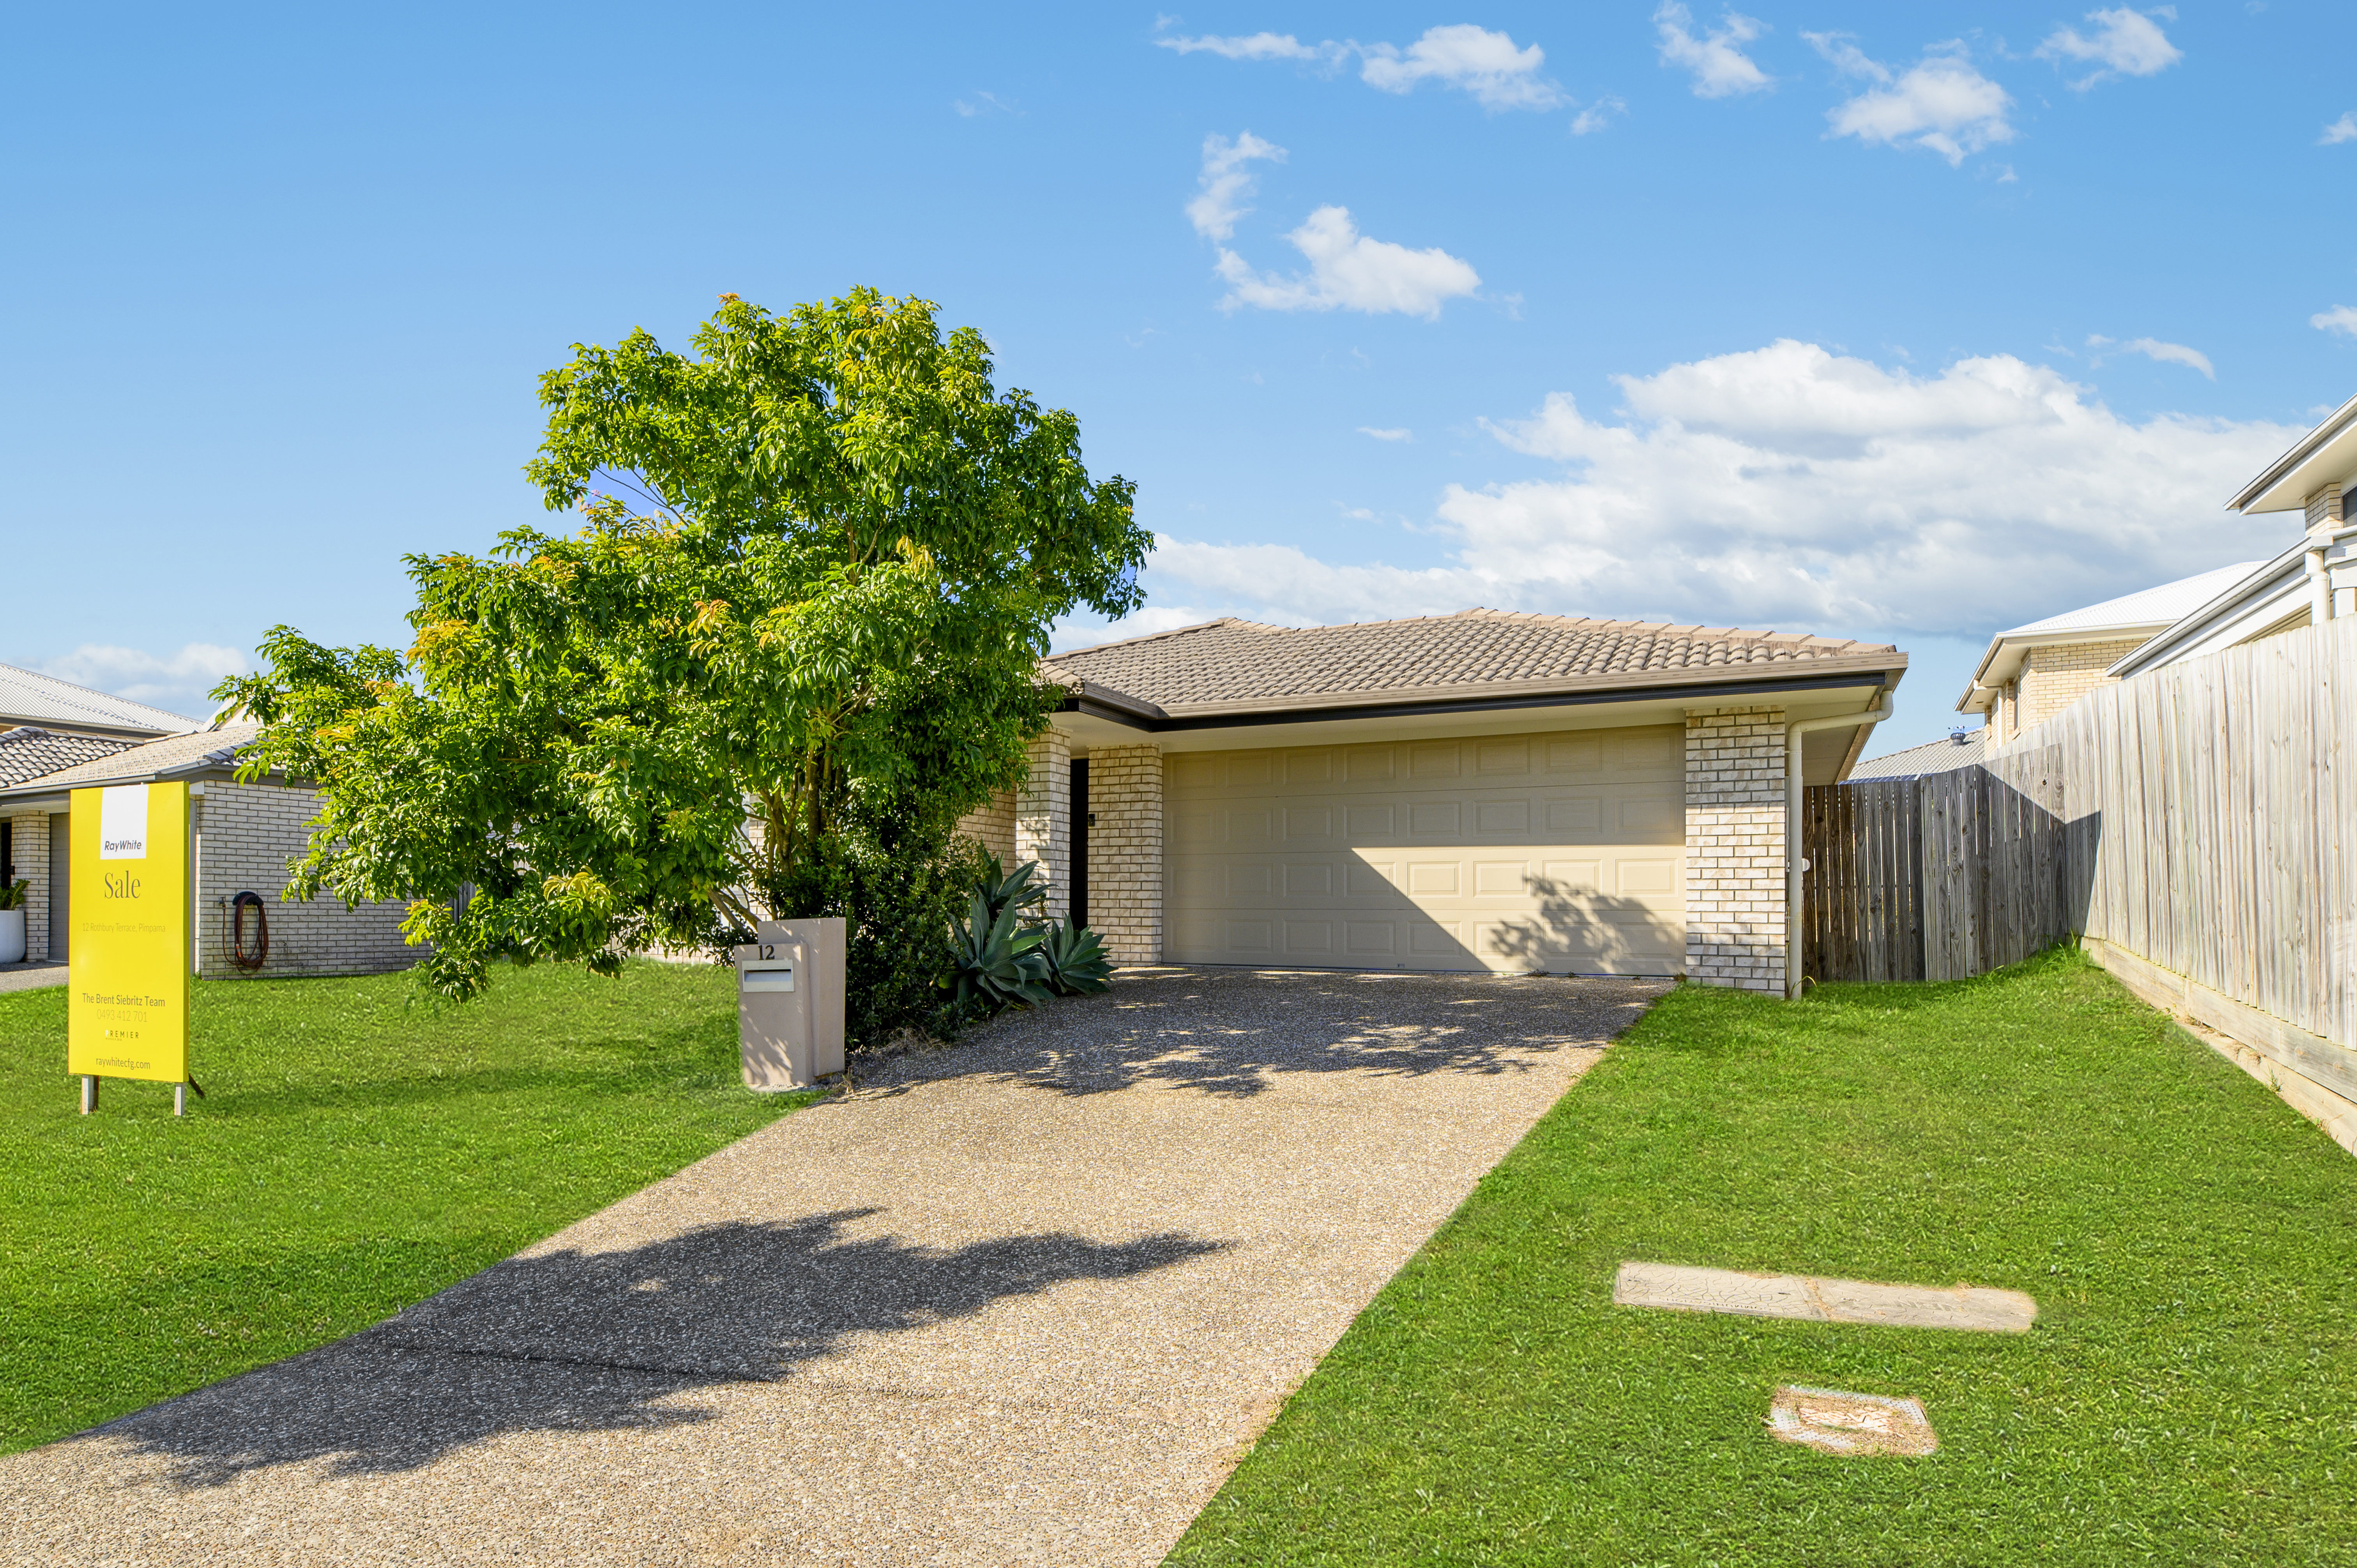 Pimpama 4房  Don't Miss This Stunning Opportunity!